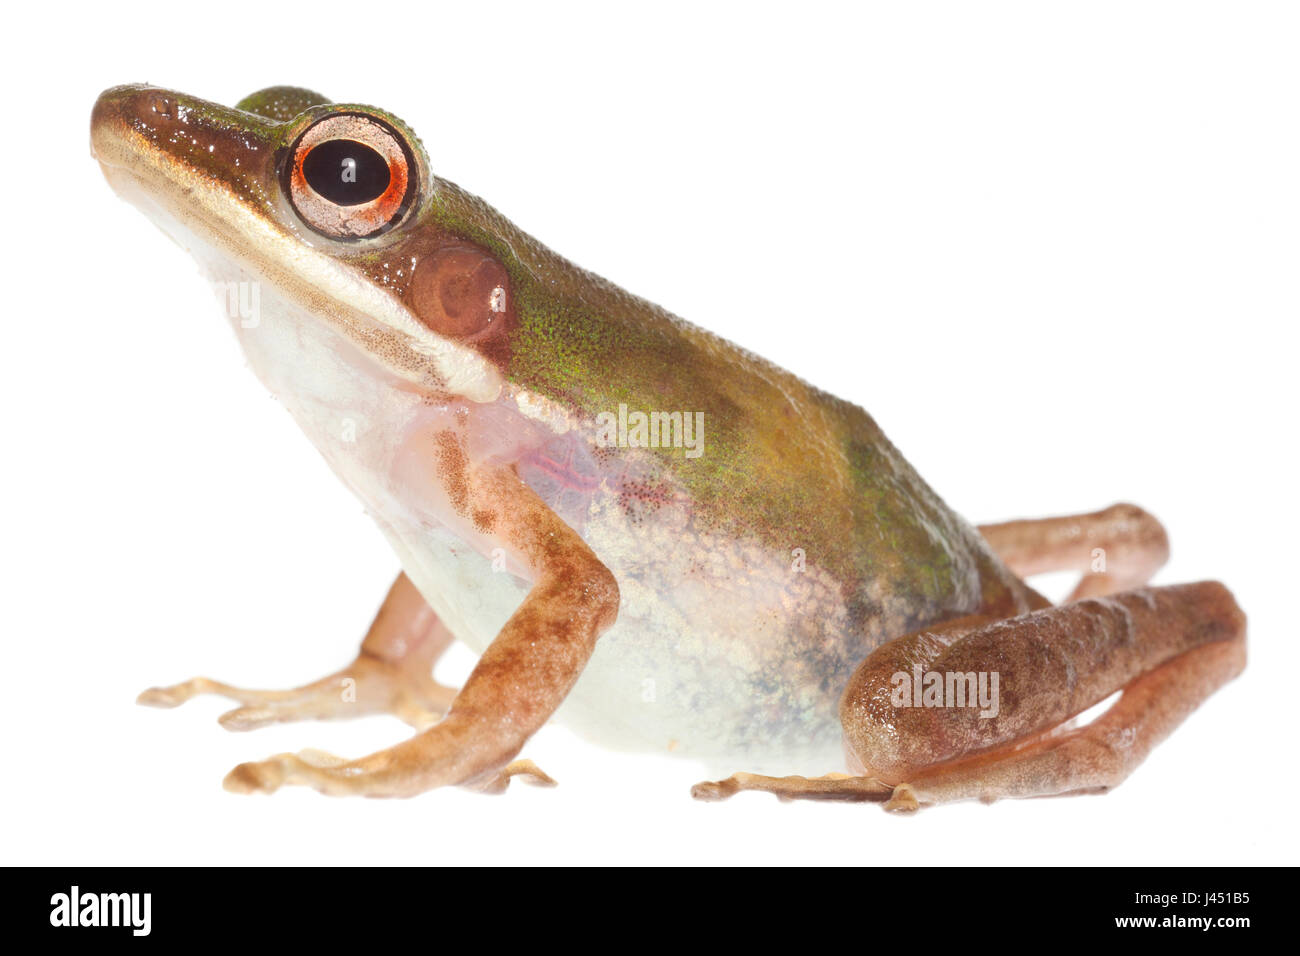 copper cheeked frog isolated against a white background Stock Photo